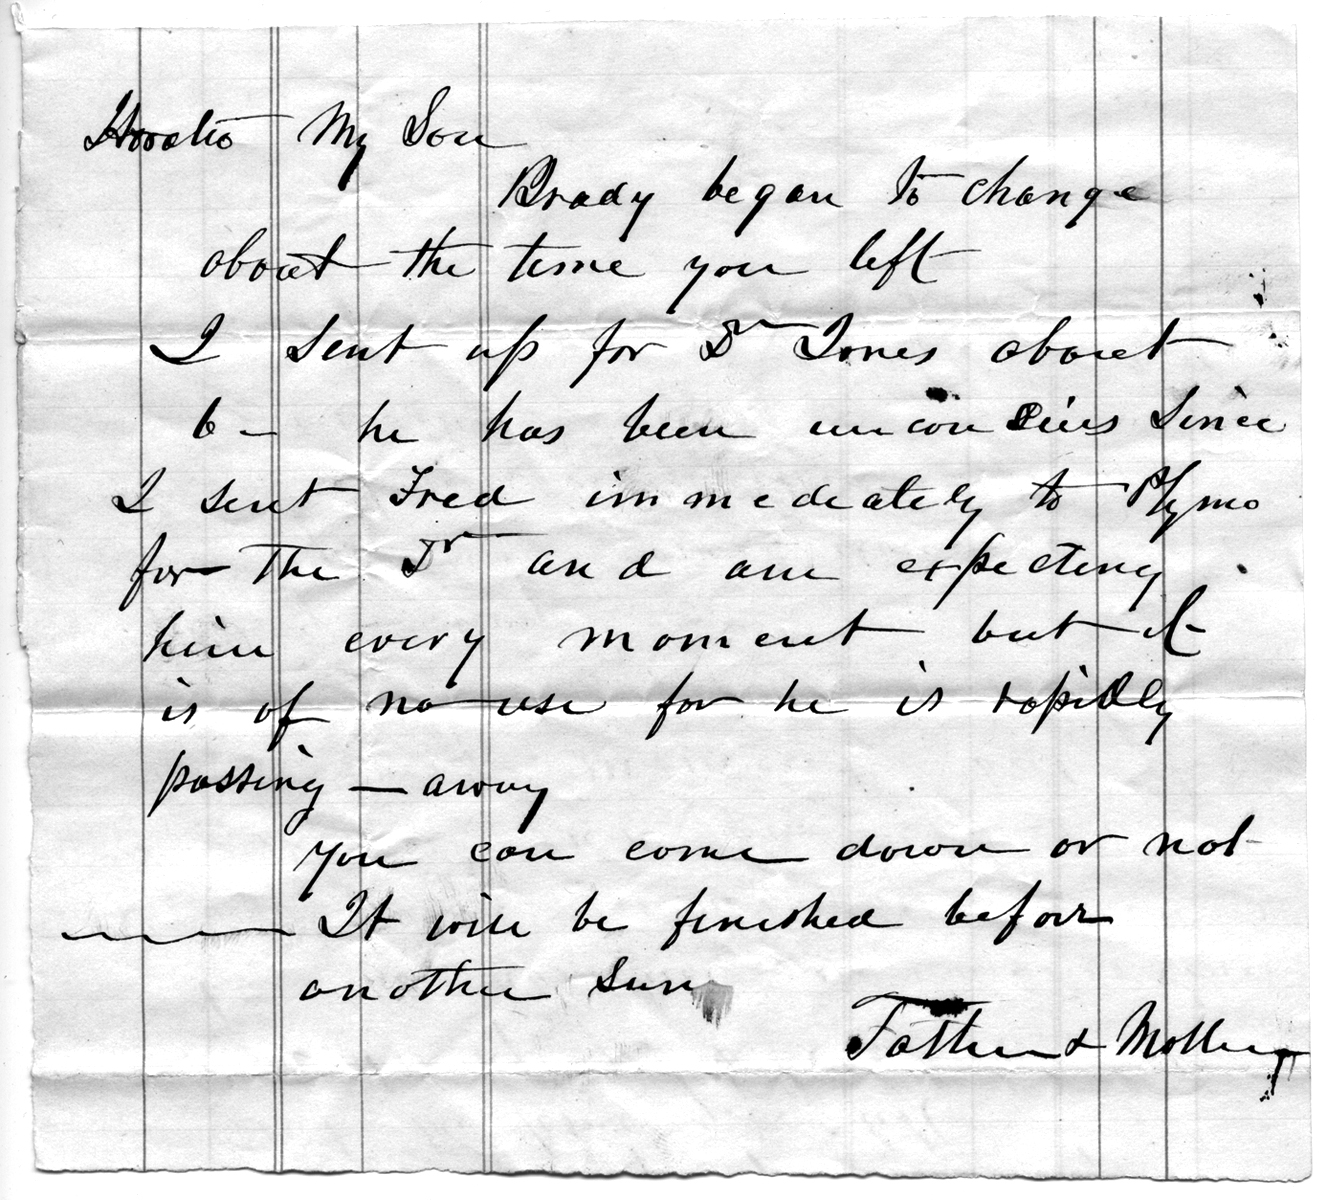 Note to Horatio from Father and Mother, October 1870 (date supplied)